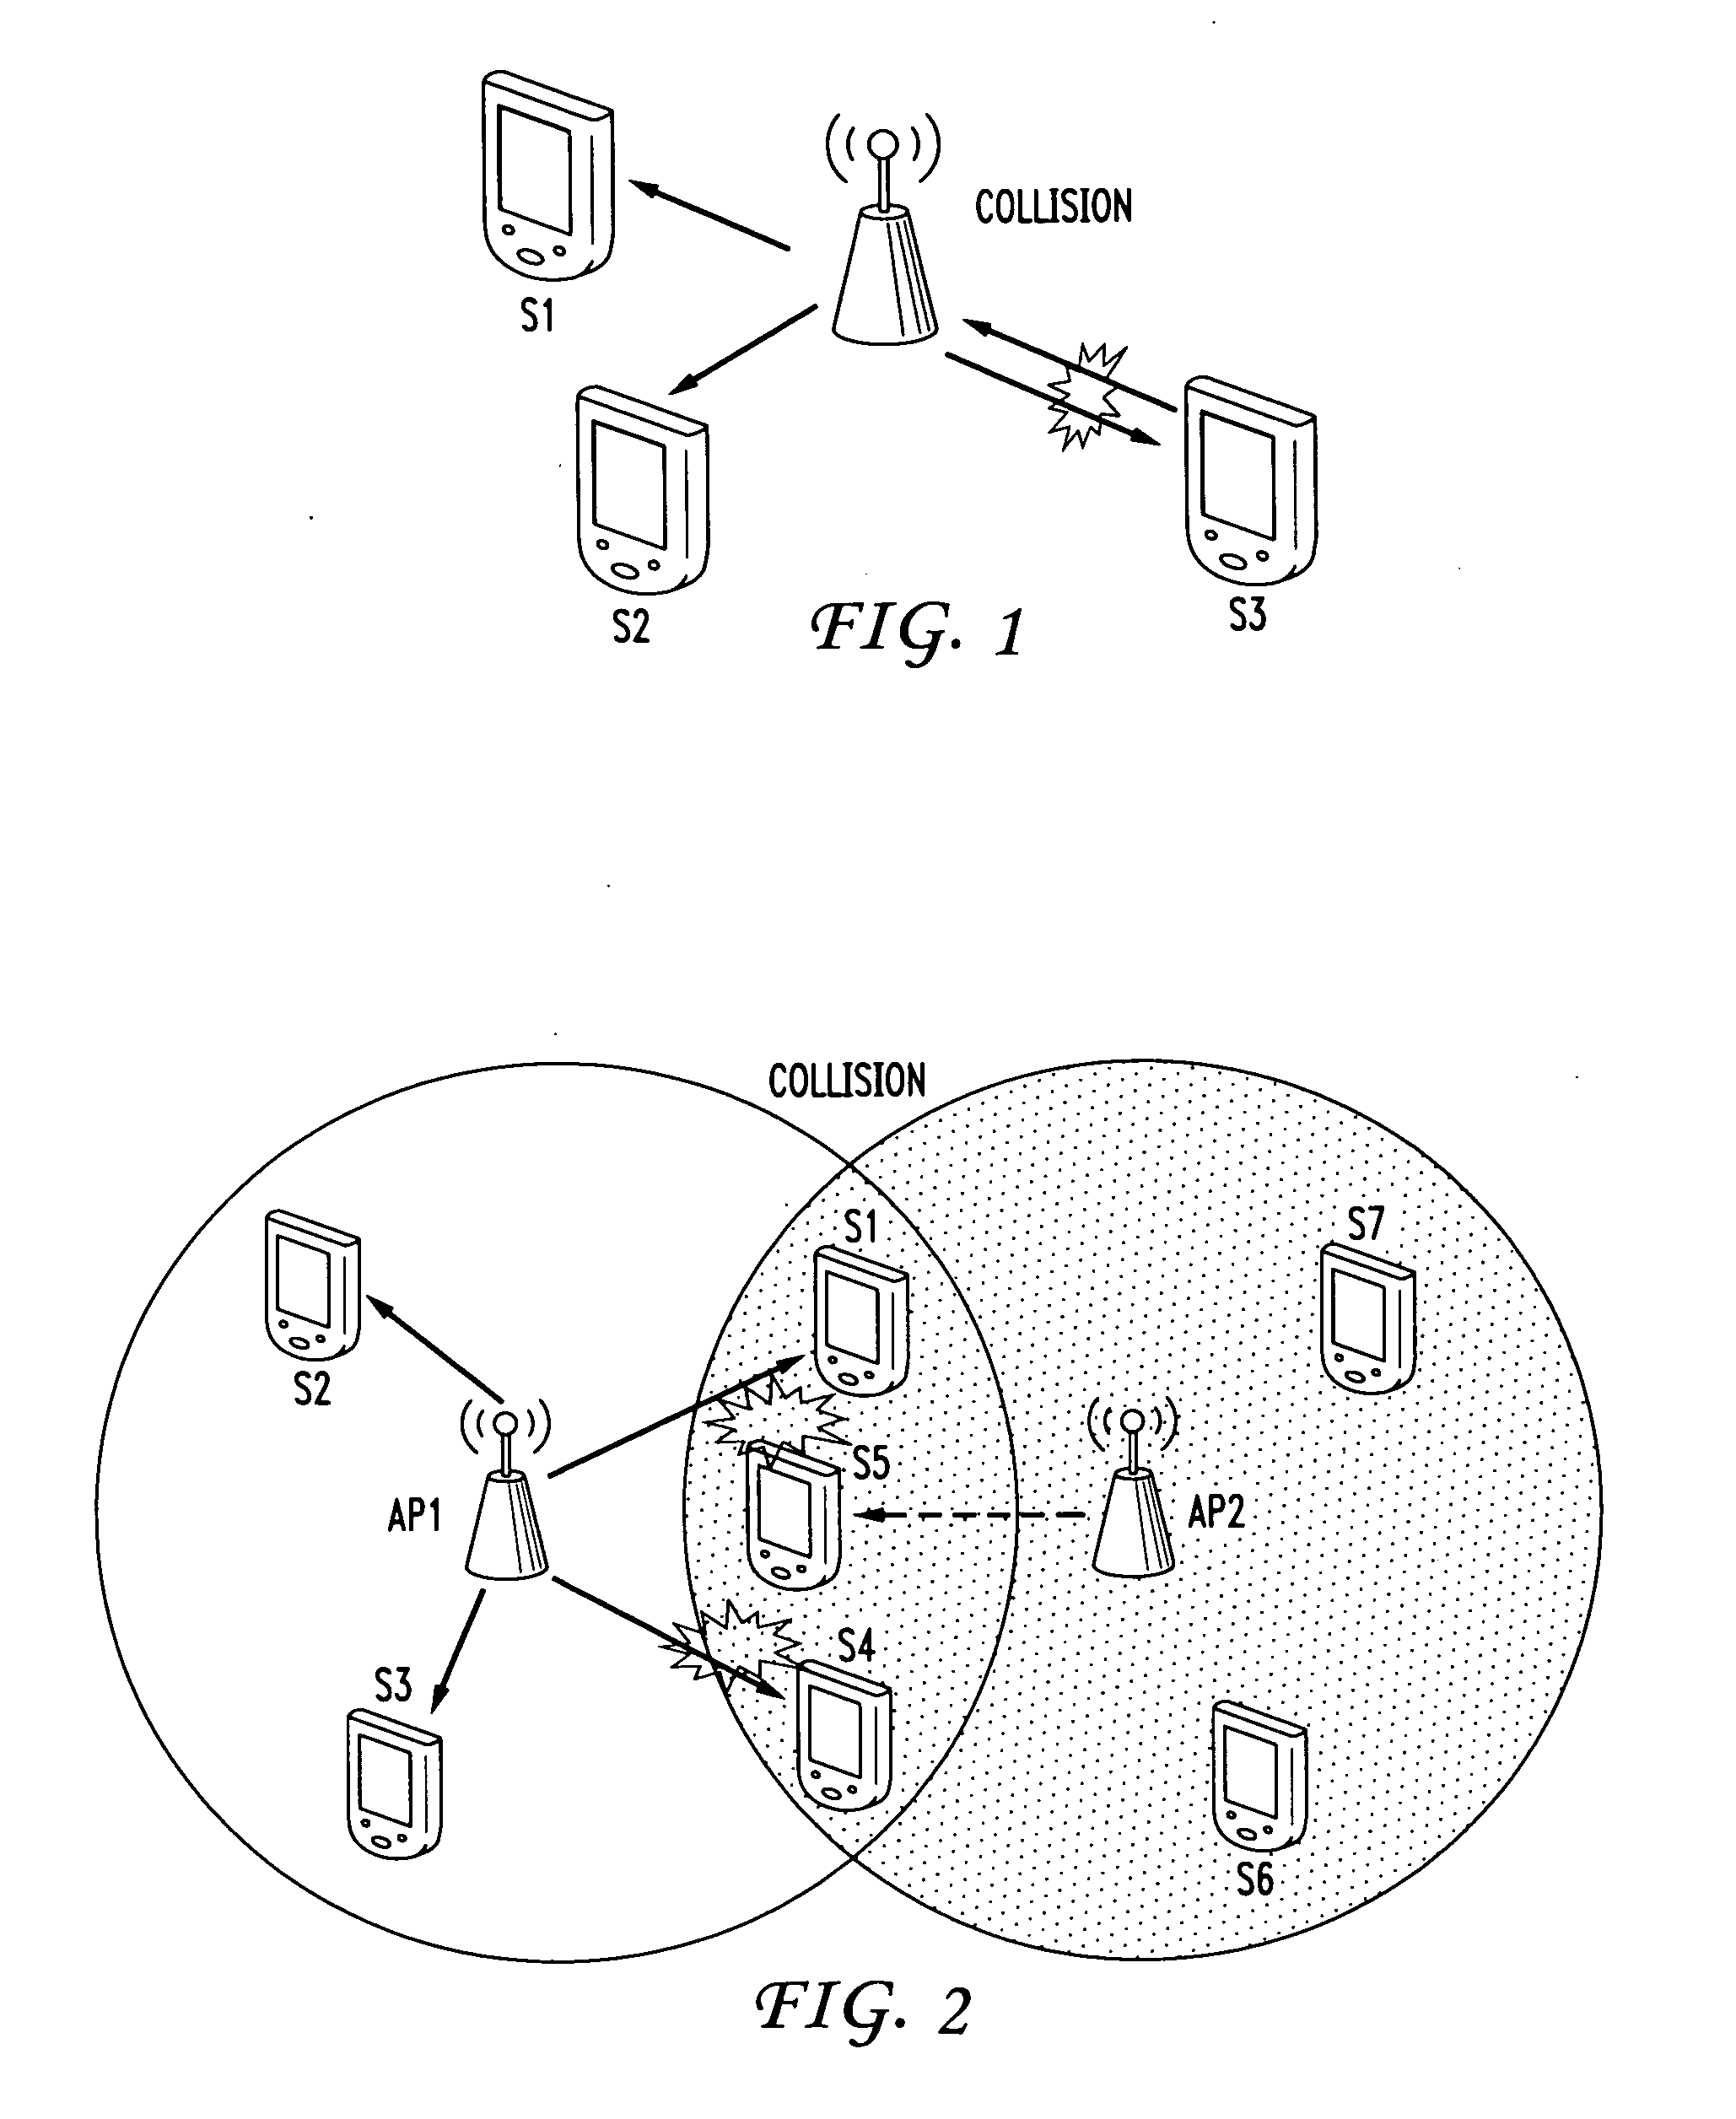 Collision mitigation for multicast transmission in wireless local area networks